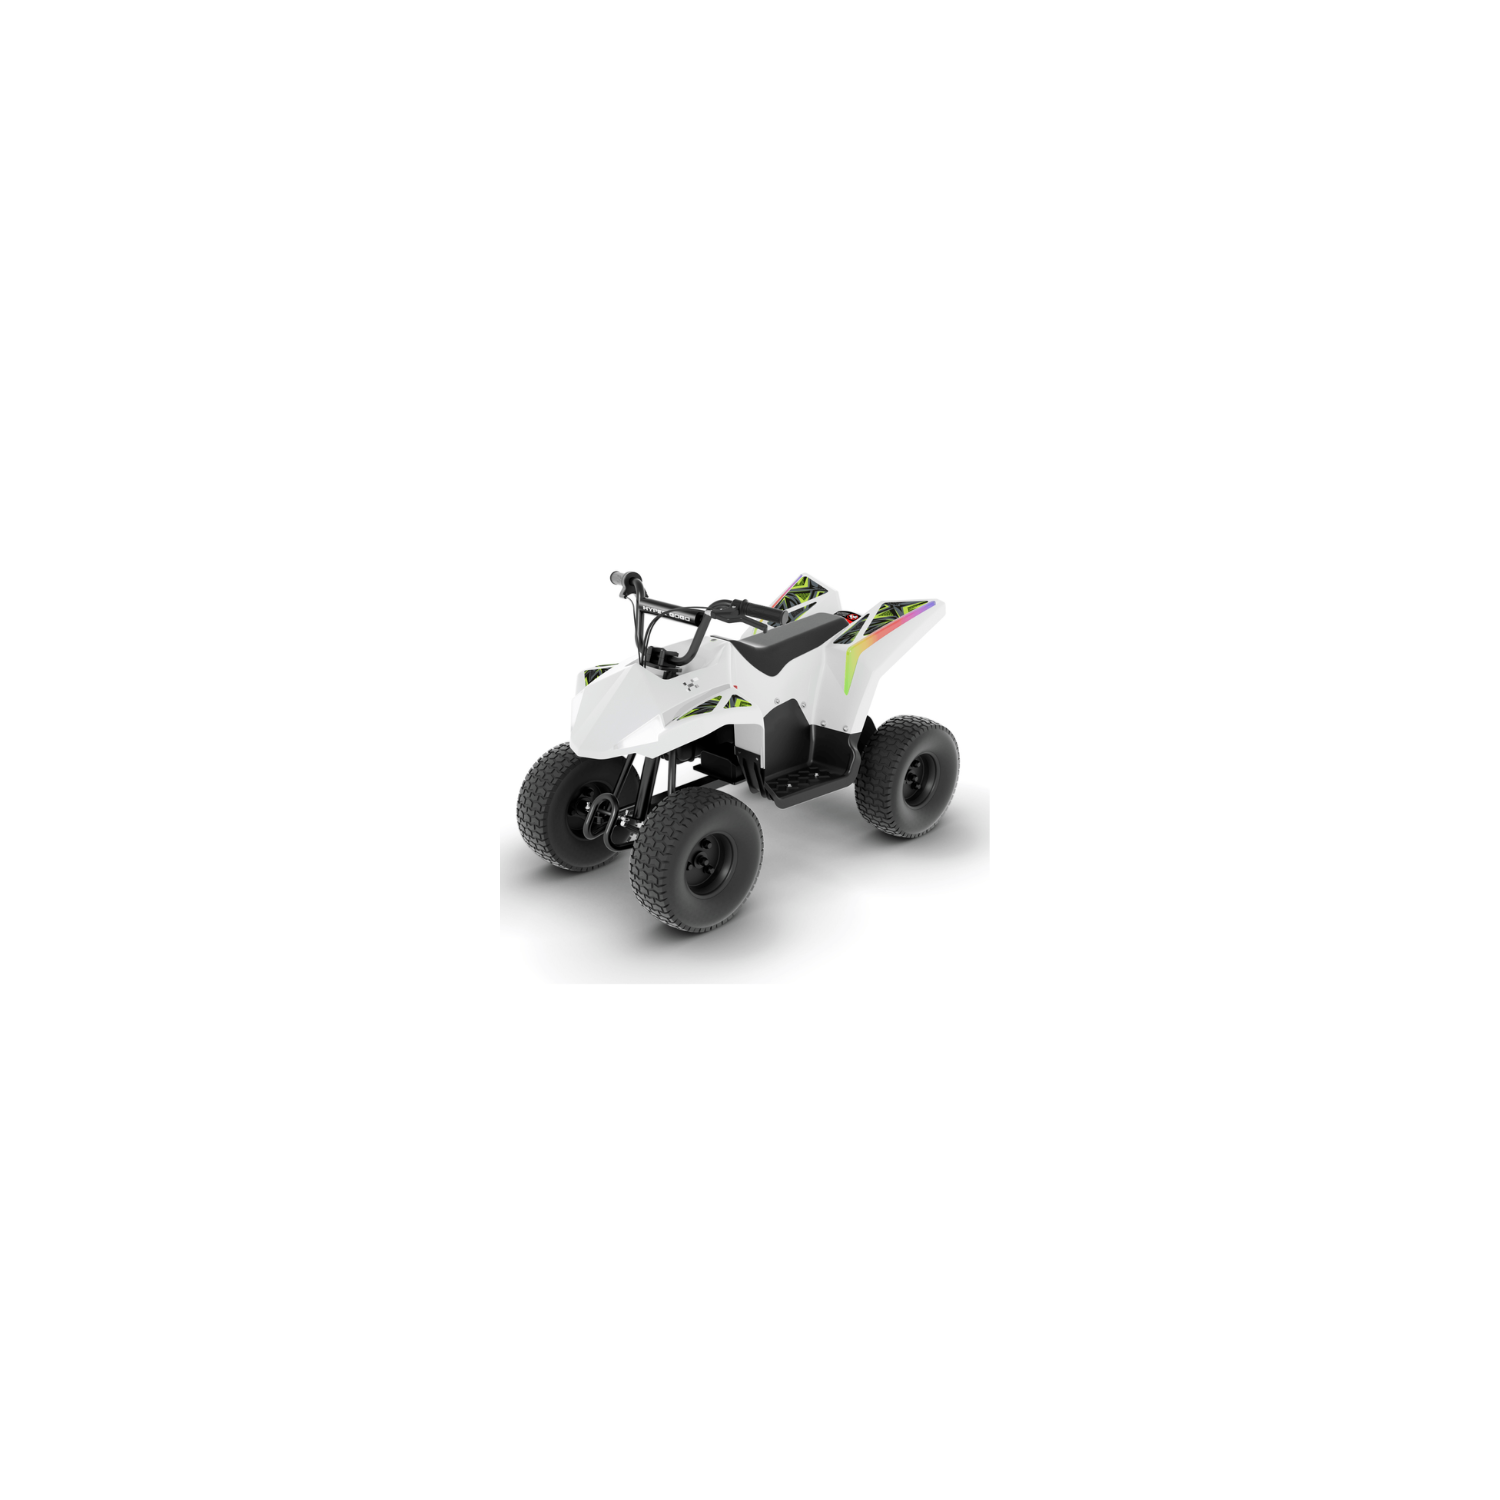 Hyper Quad Dirt ATV | Kids ATV Ages 12+ | 36V Electric 4-Wheeler with 350W Motor | Off-Road |LED lights | Bluetooth speakers and App | 3-Speed Modes | Ride on ATV |White